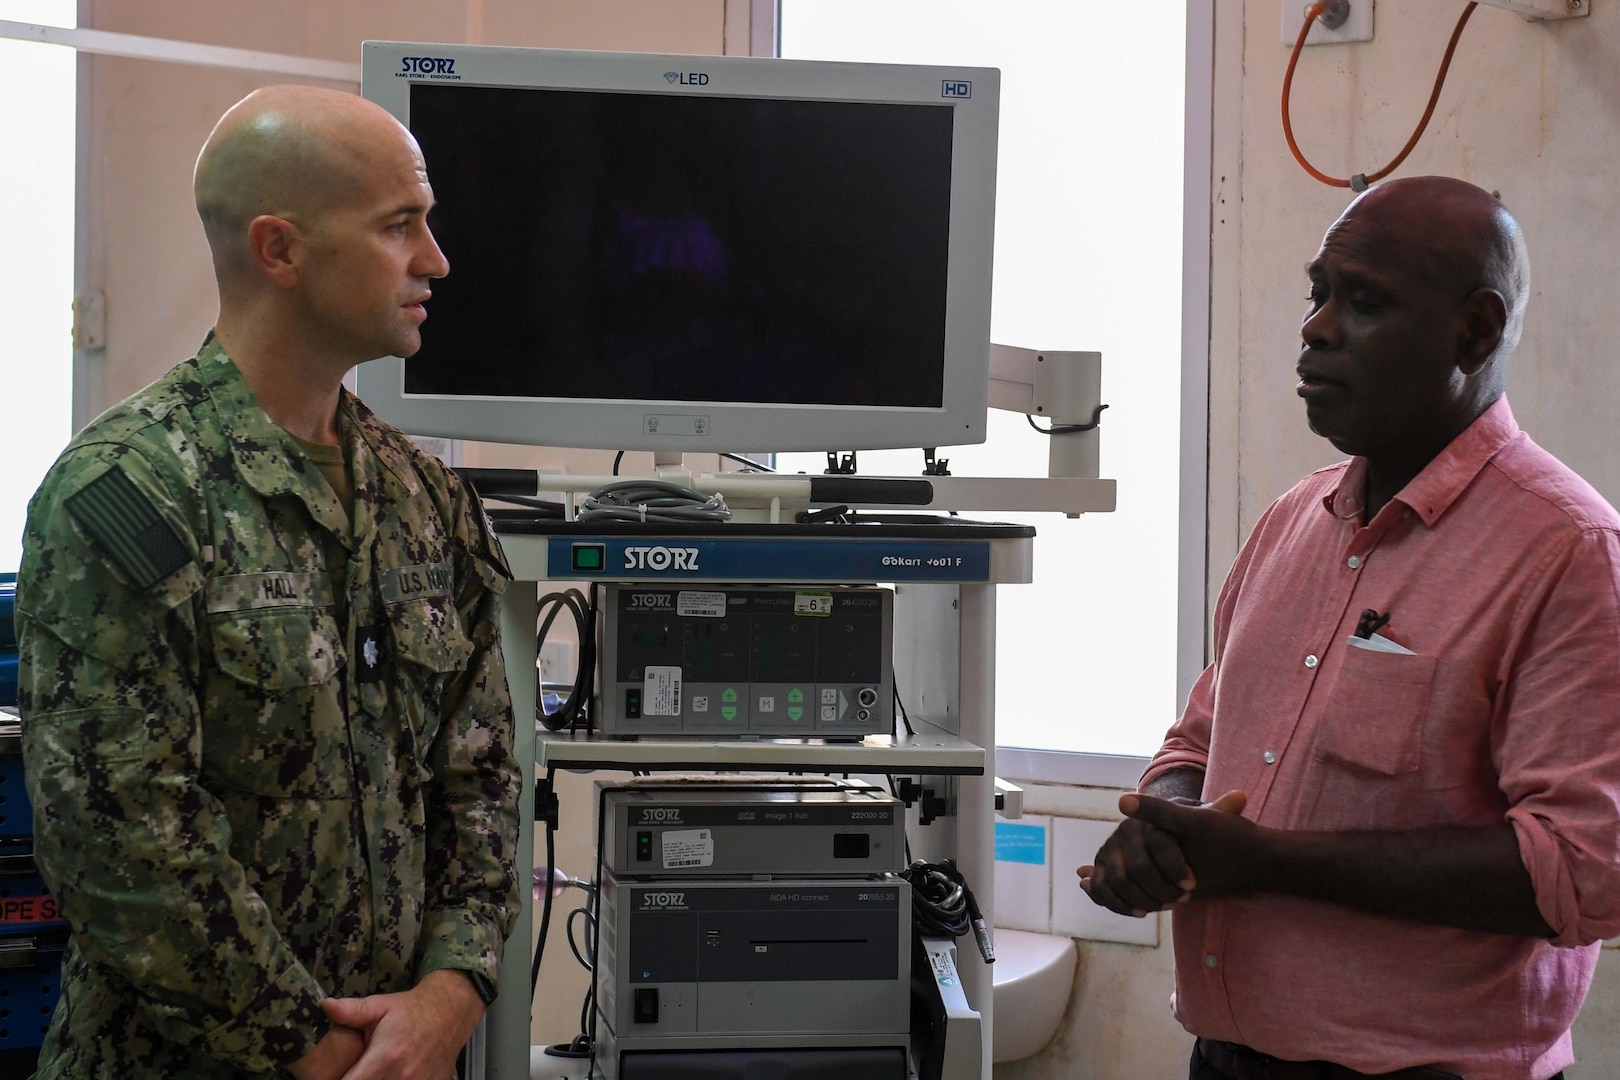 A Navy officer and a doctor speak in front of medical equipment in an office setting.